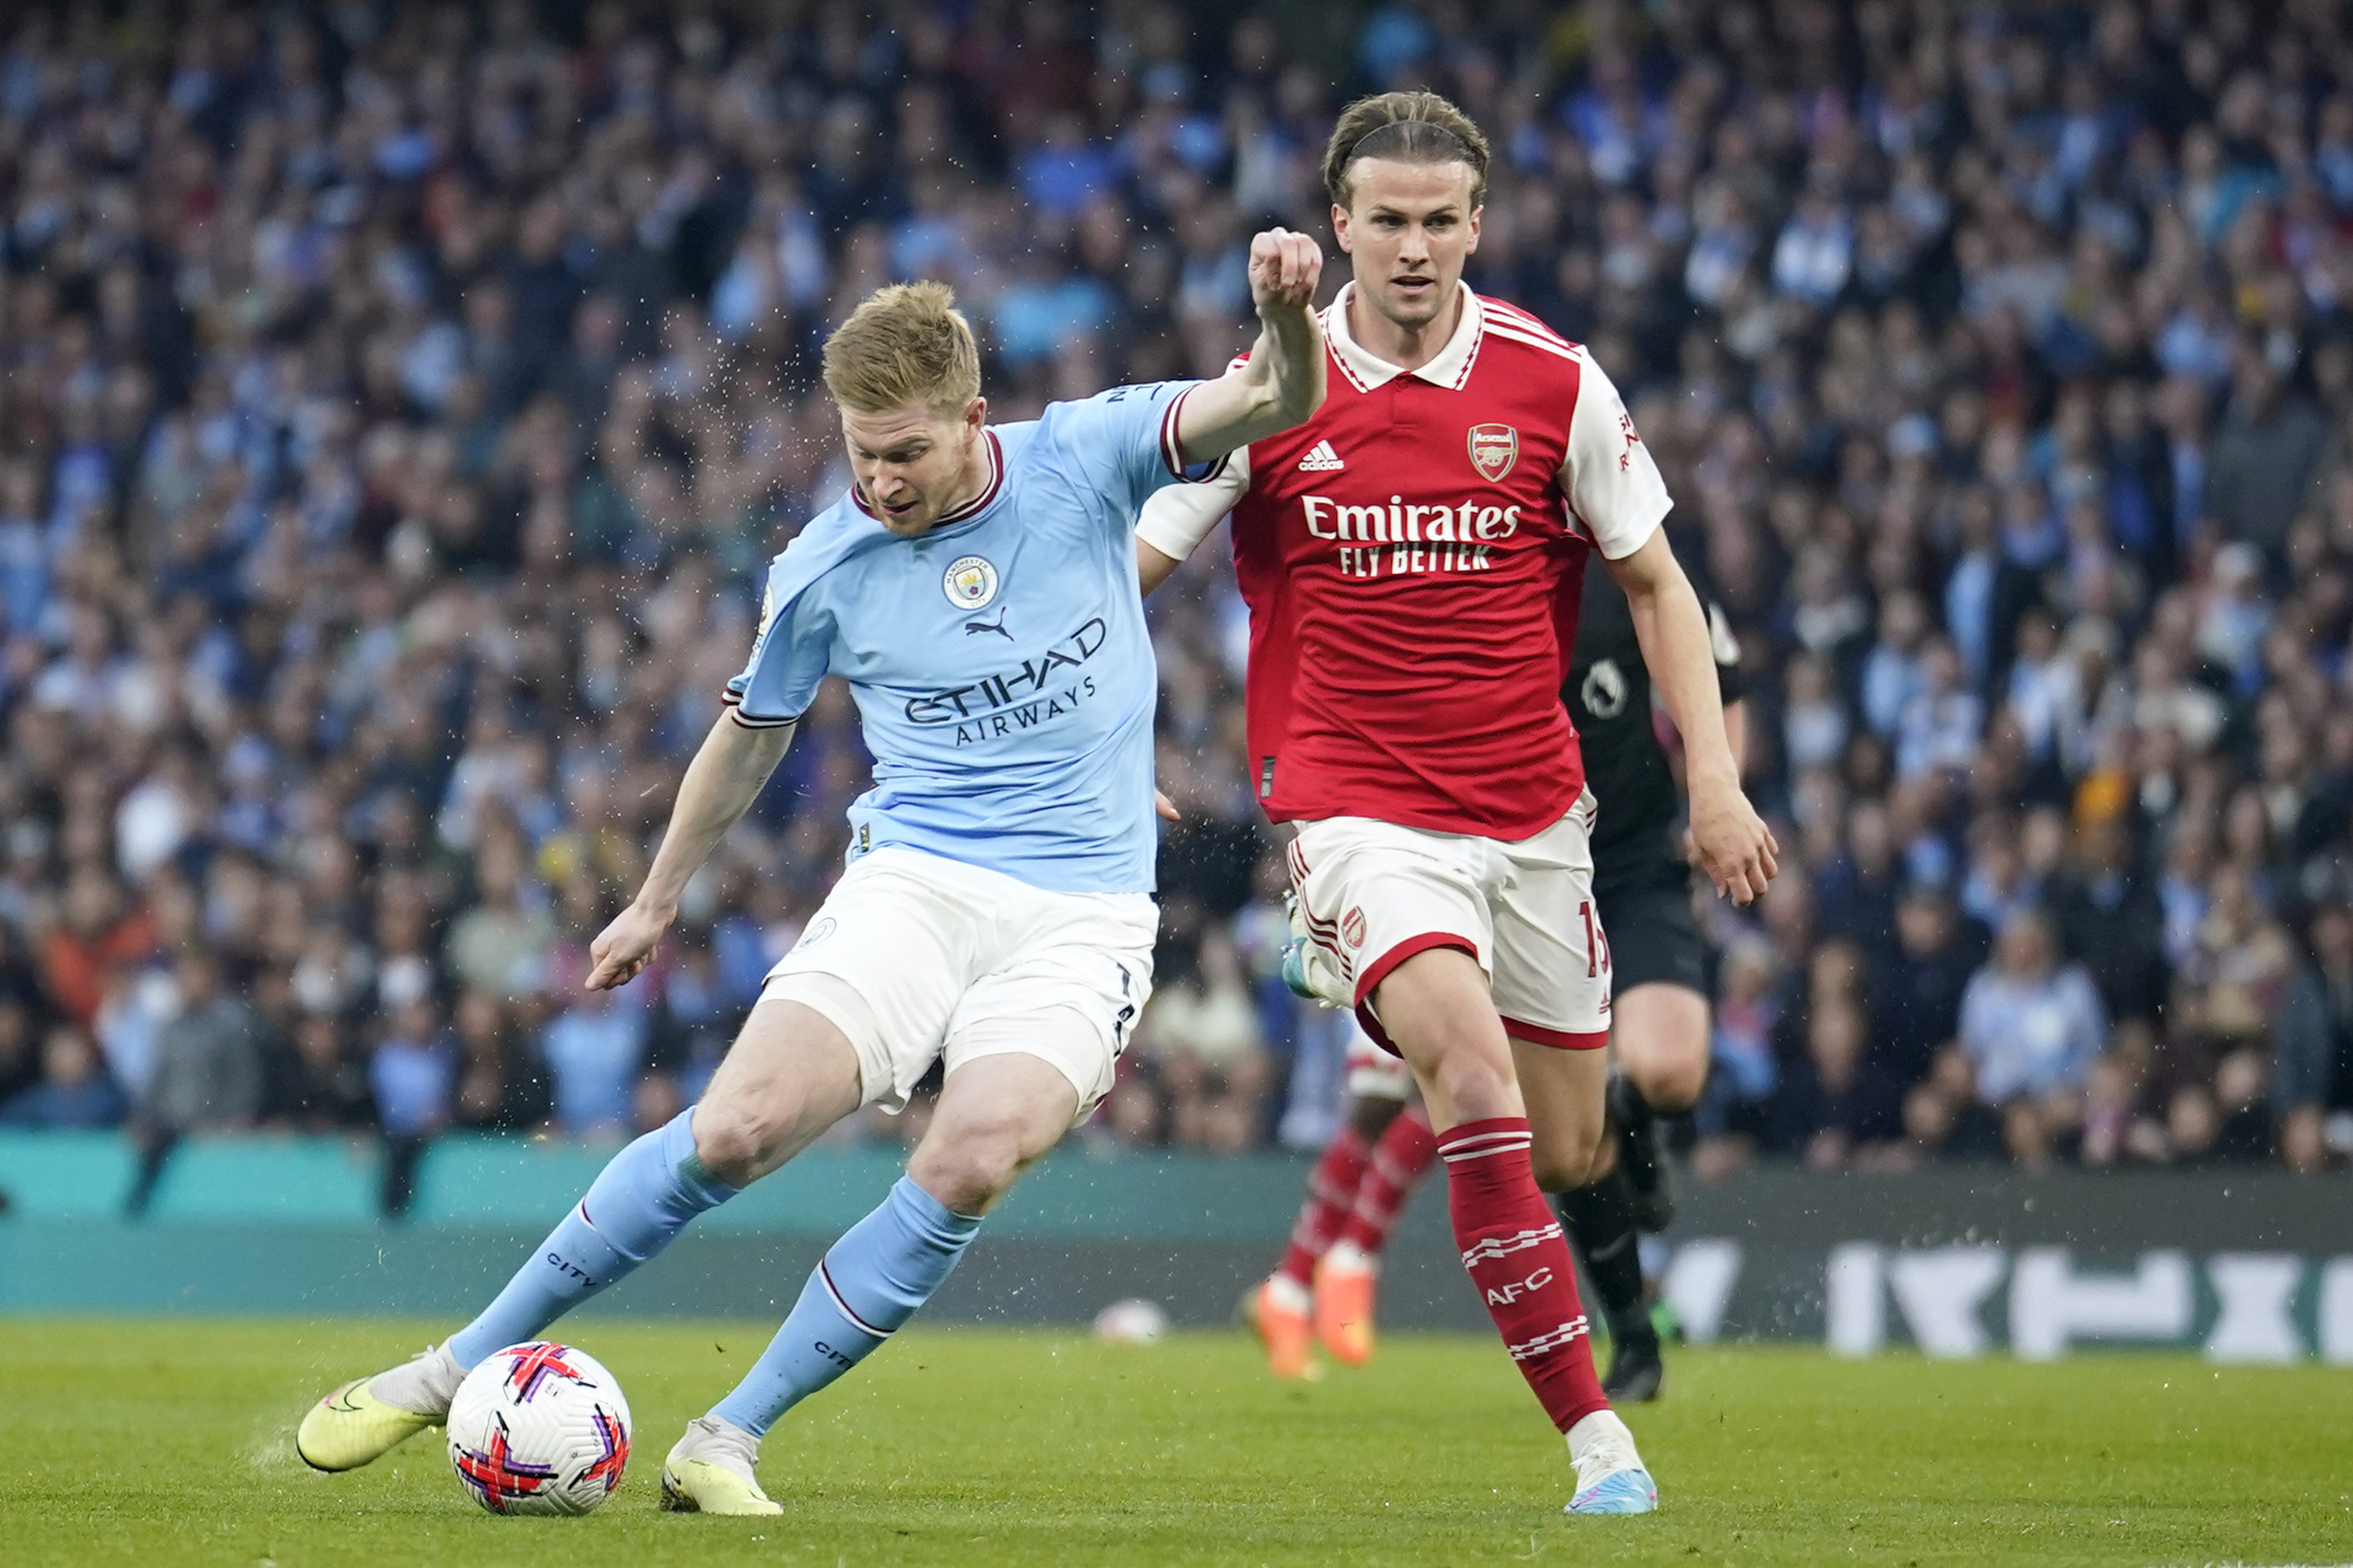 Brighton & Hove vs. Manchester City free English Premier League live stream  (5/24/23): How to watch, time, channel, betting odds 